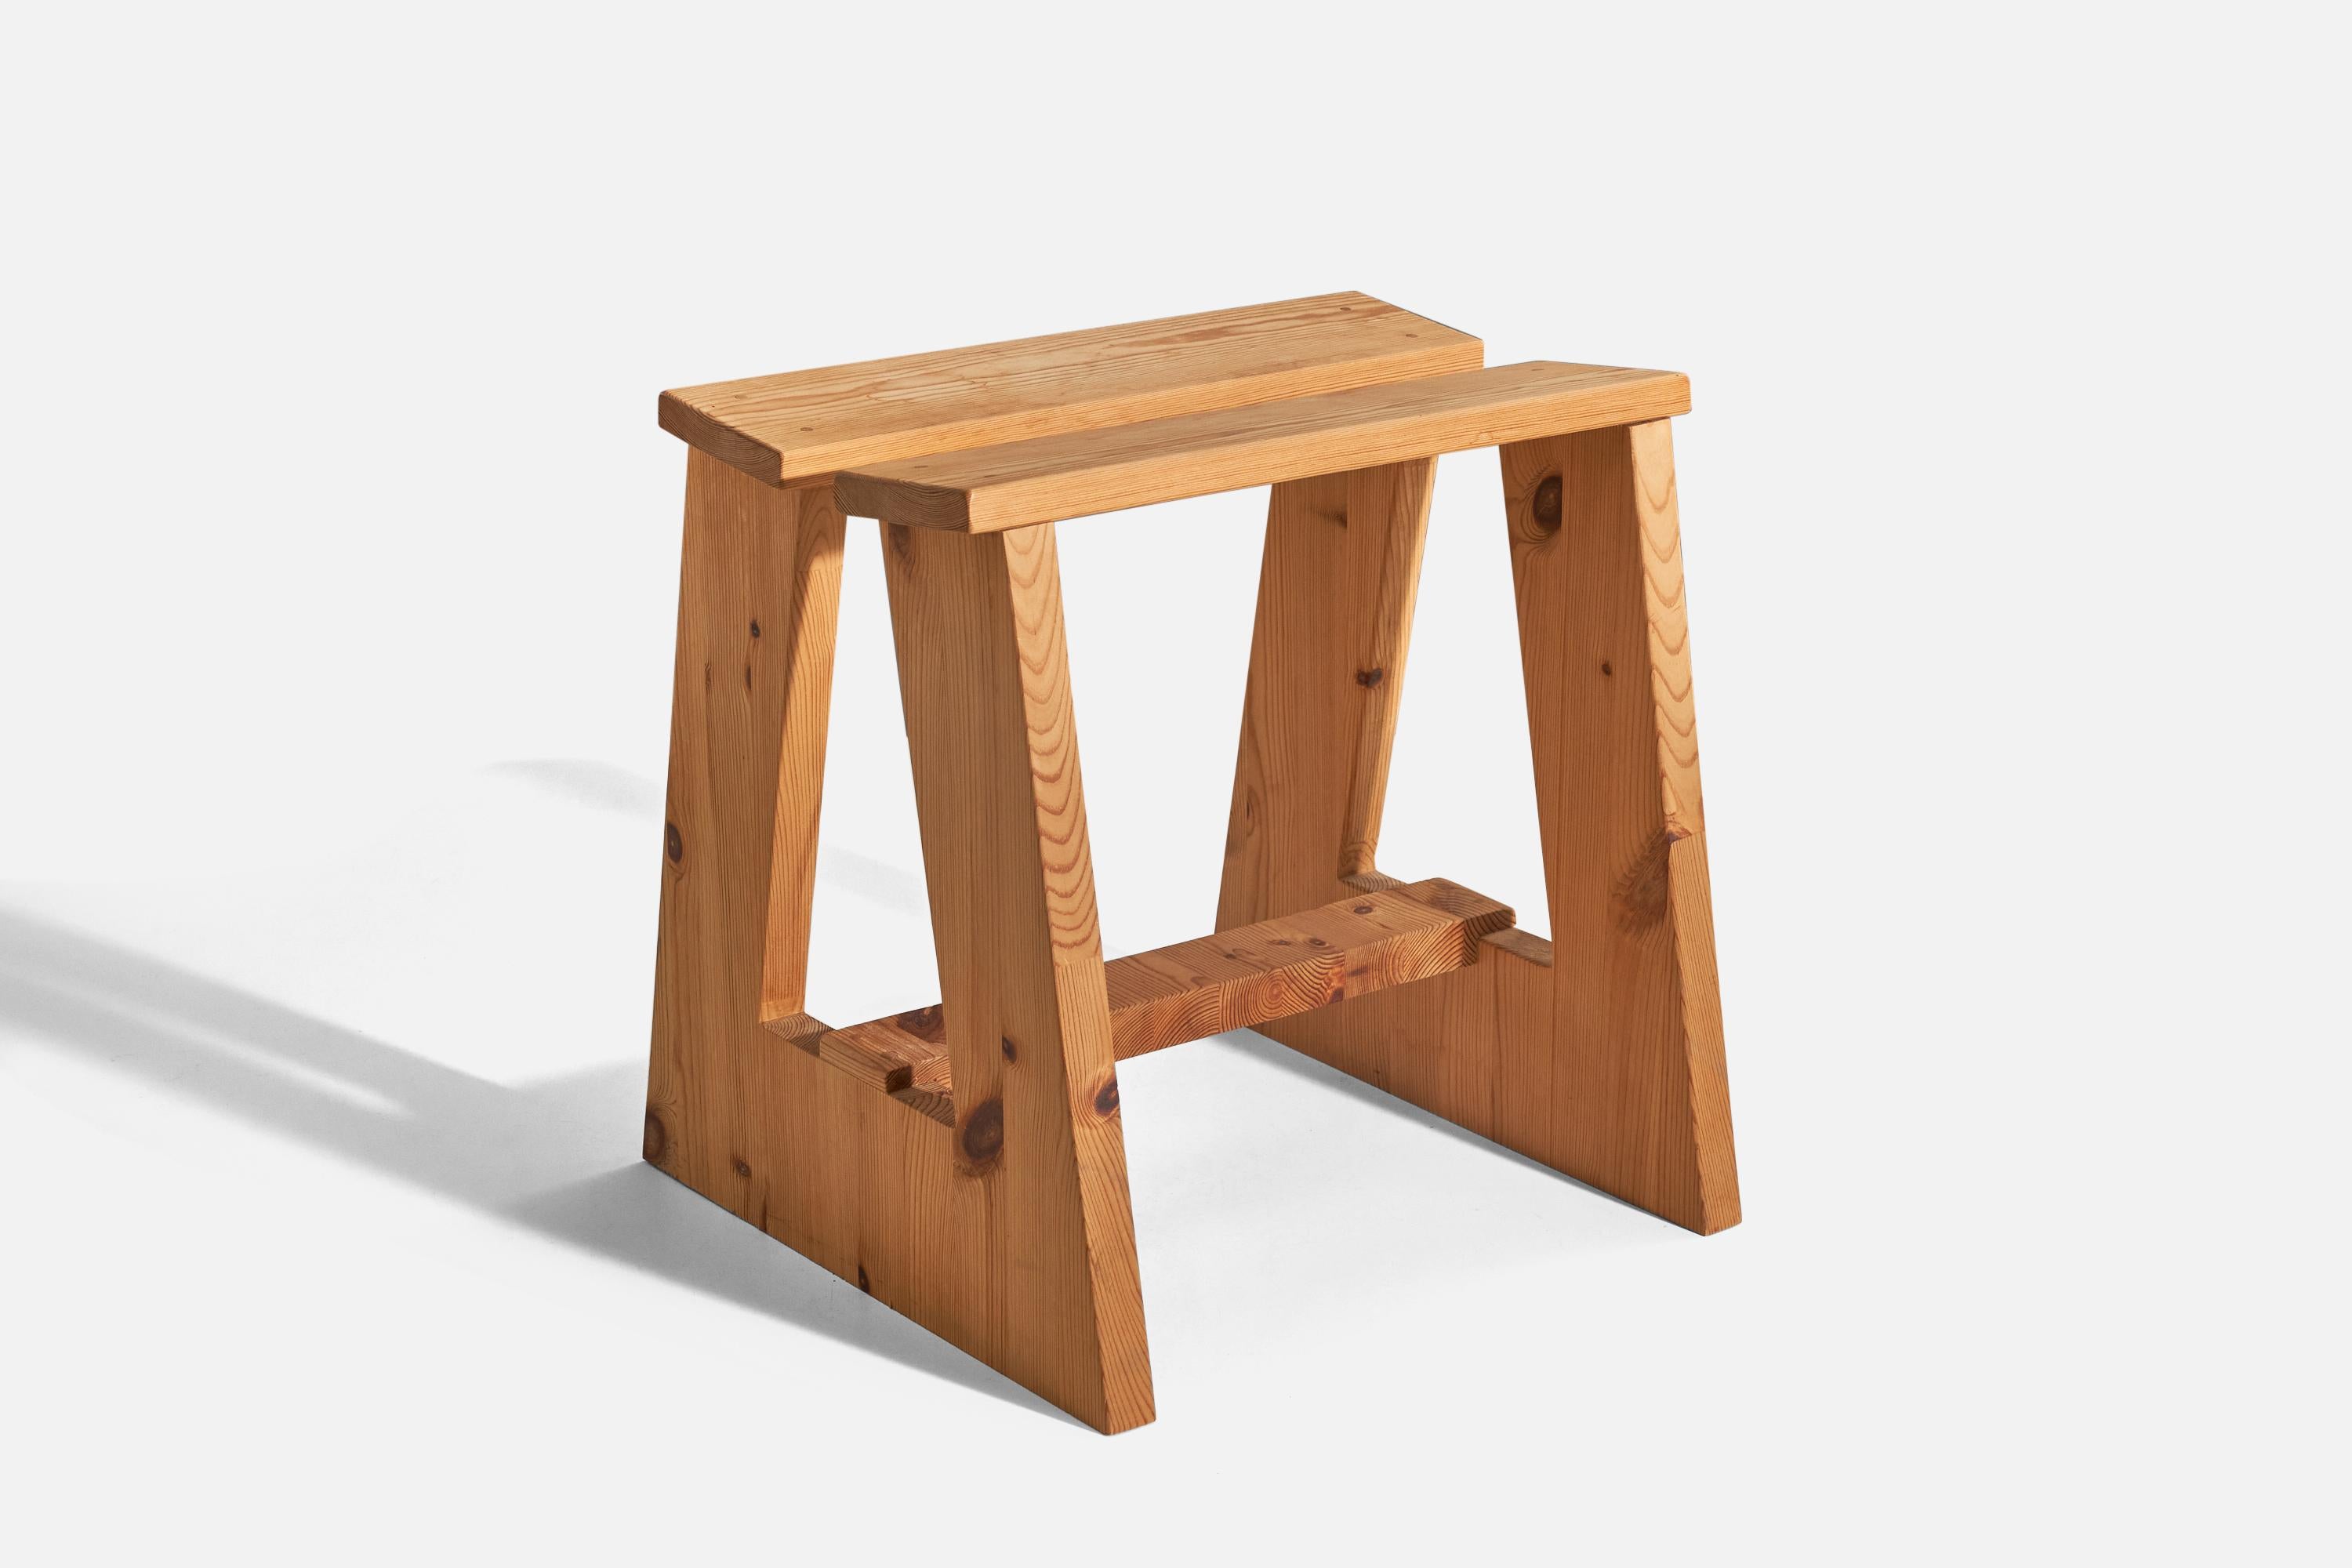 A solid pine wood stool designed and produced in Sweden, c. 1970s.